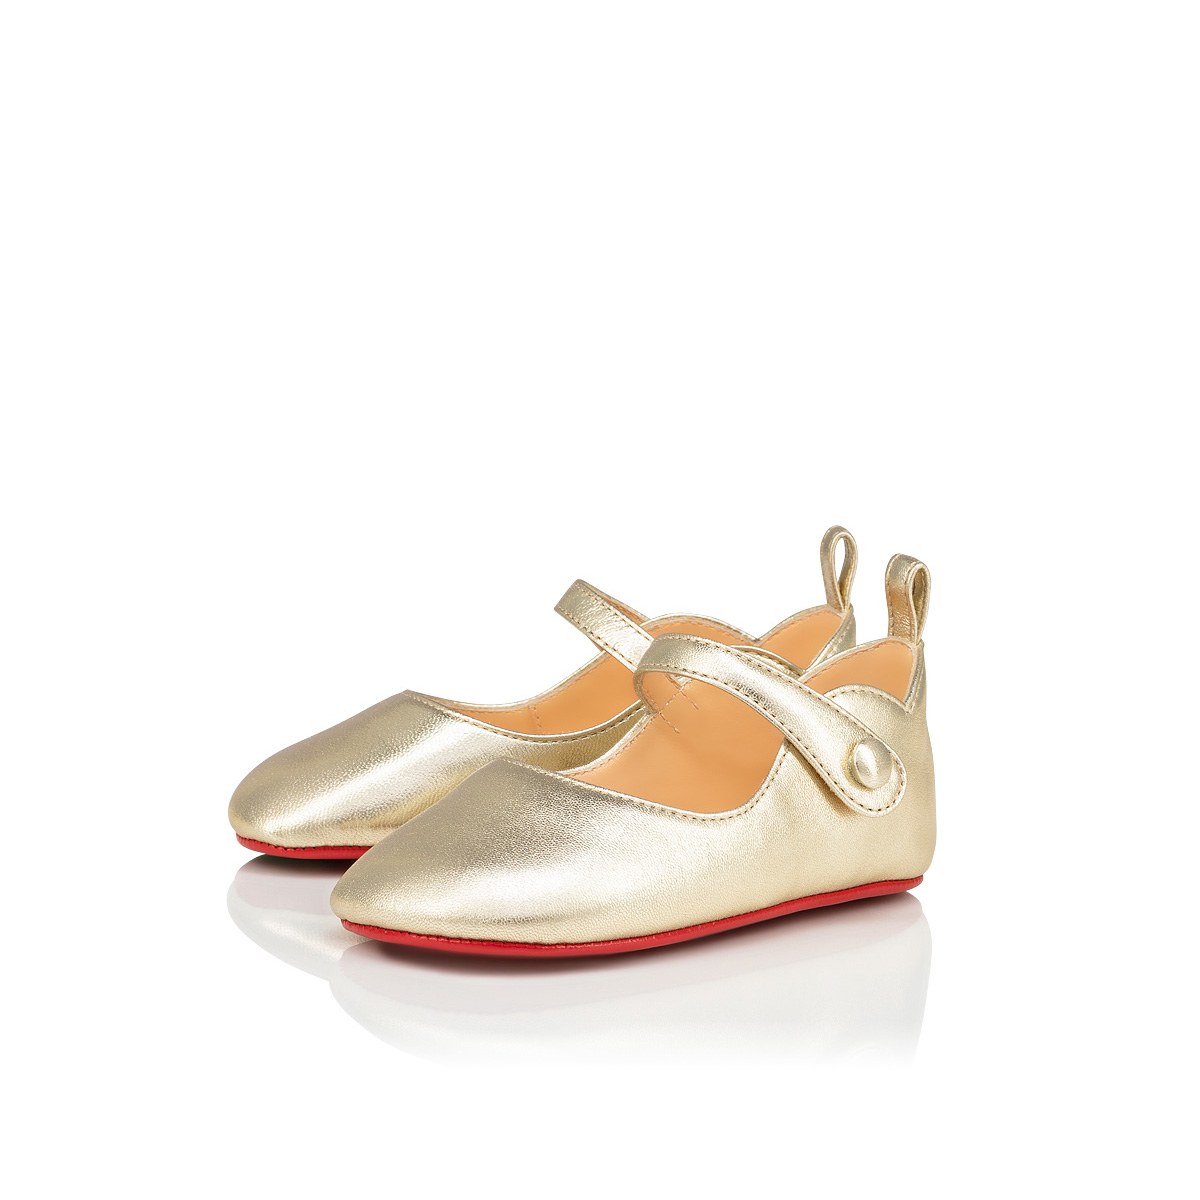 Baby Love Chick - Ballerinas Nappa leather - Louboutin